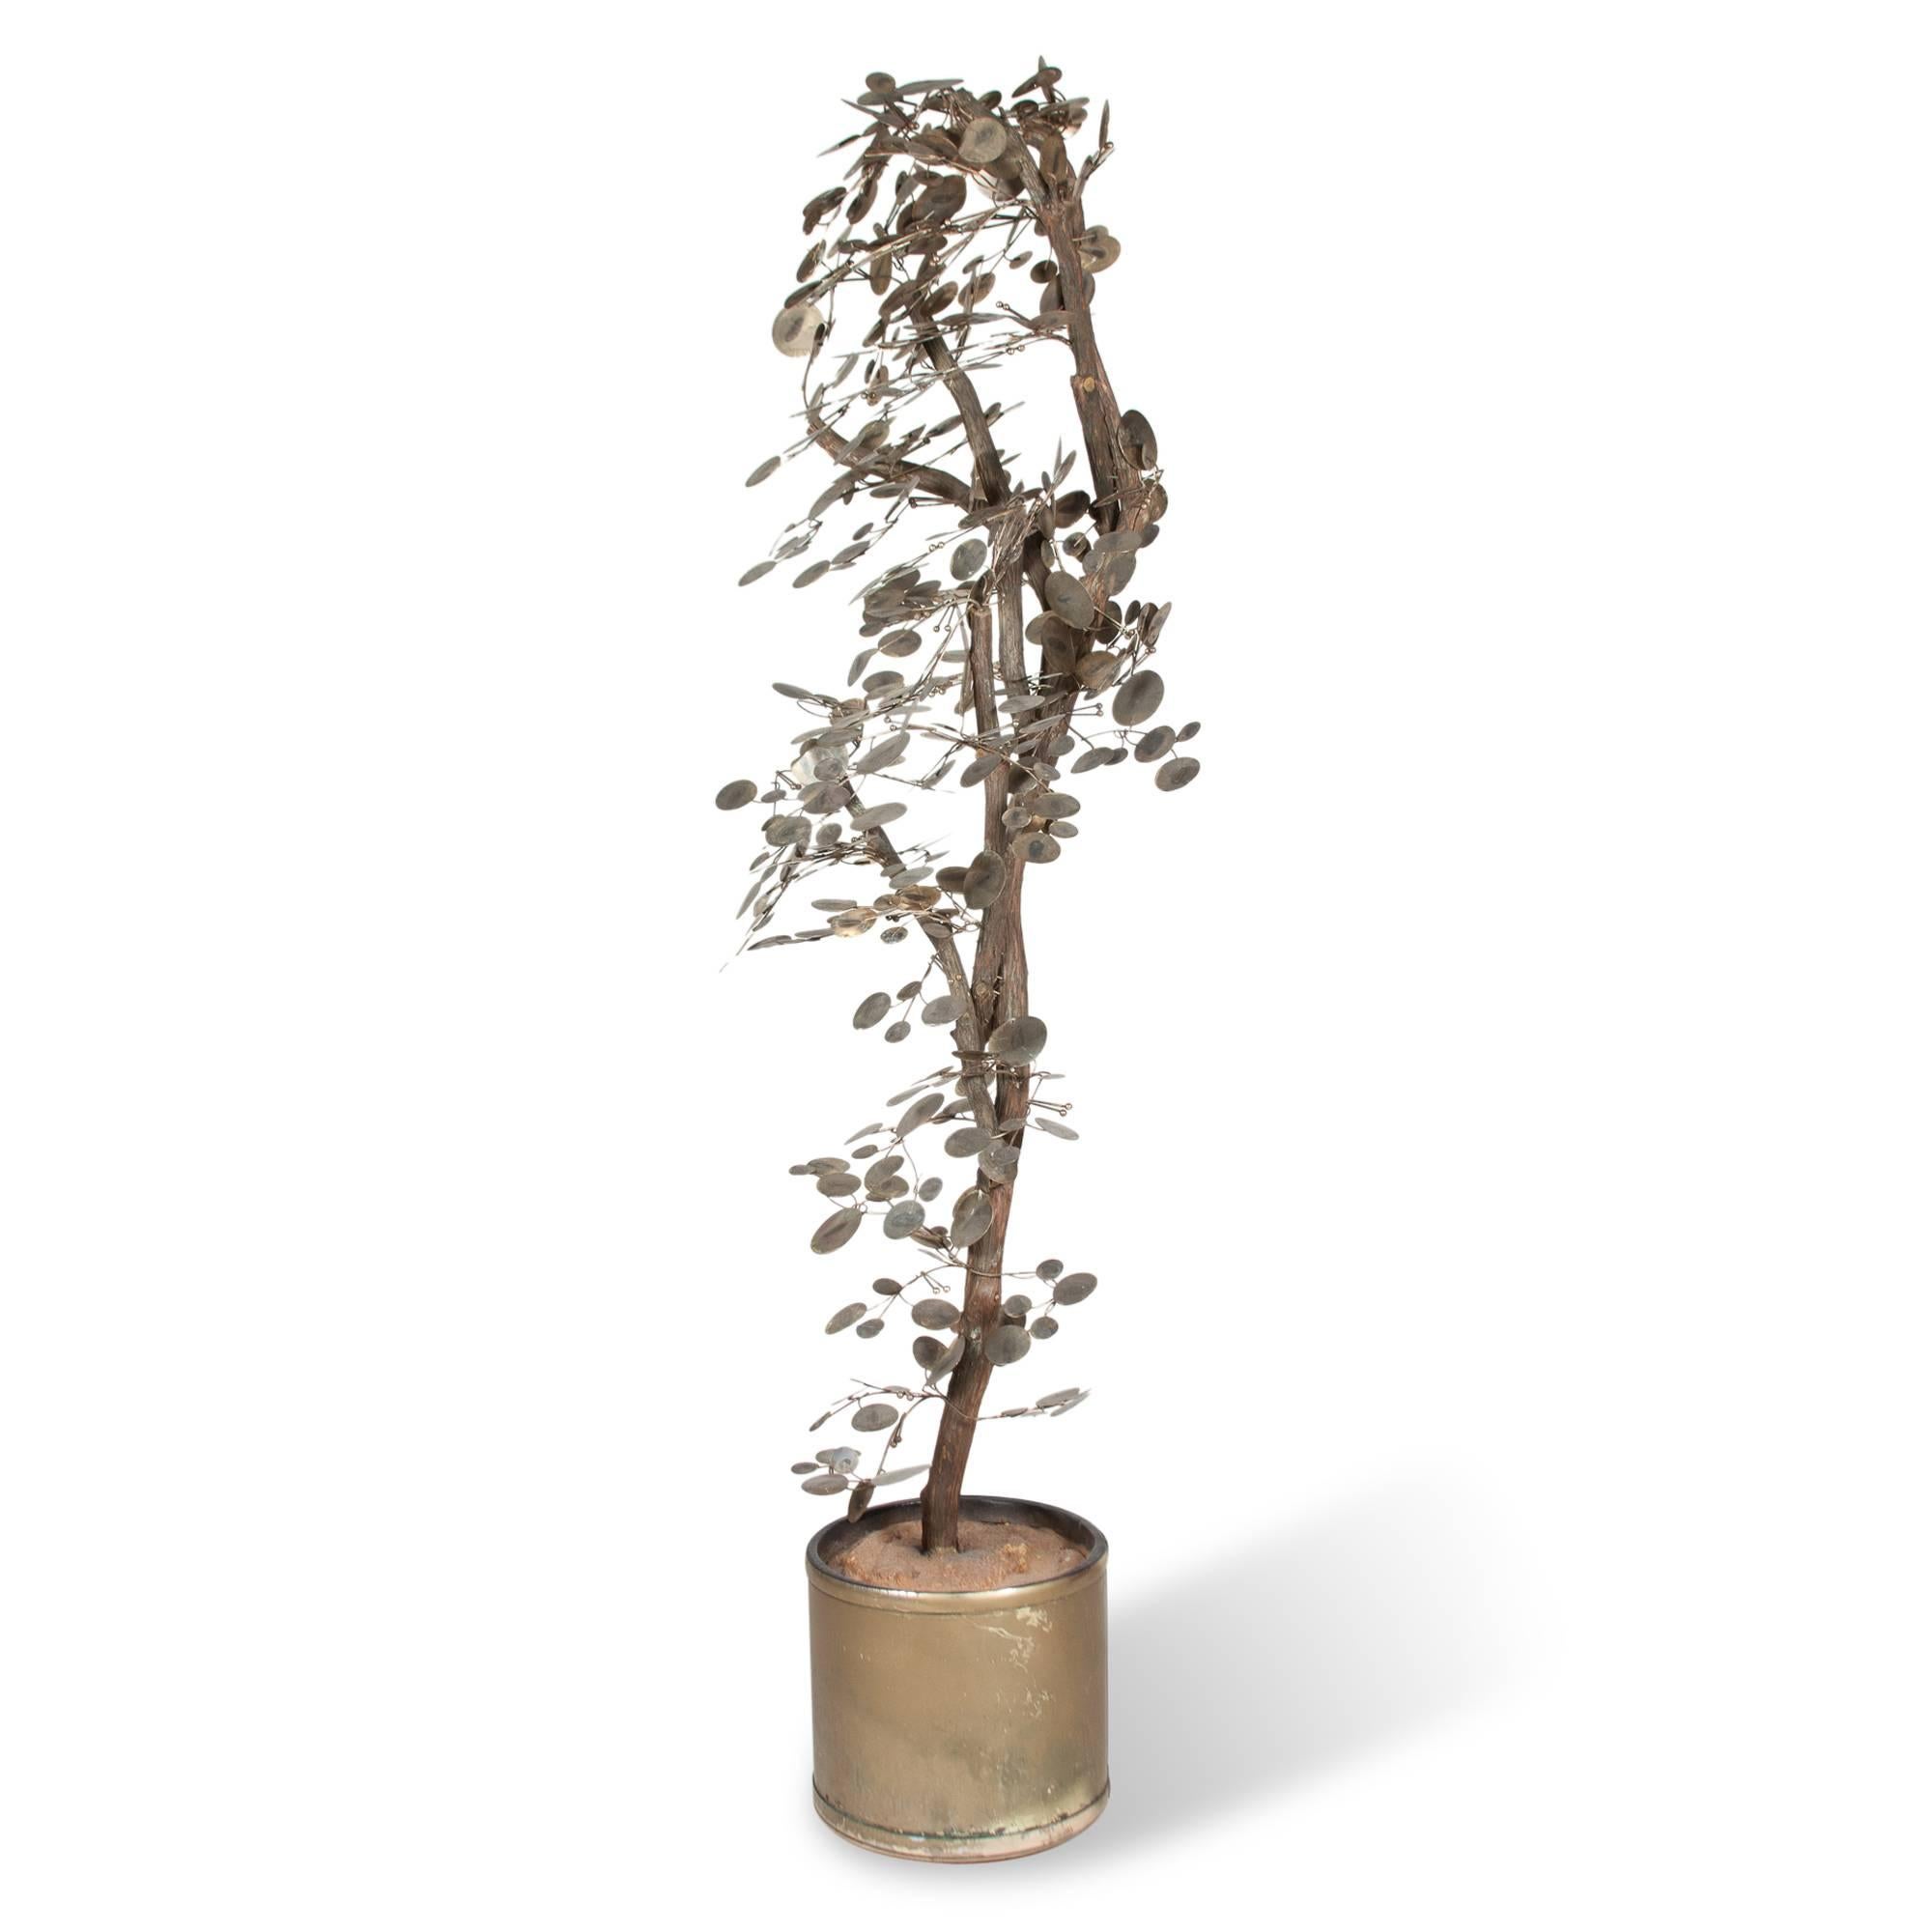 Large brass and gilt painted wood tree sculpture, the leaves in patinated brass, attached to genuine wood tree set into a resin material in a brass cylindrical pot, by C. Jere for Artisan House, America, early 1970s. Height 6 feet. (Item #2381